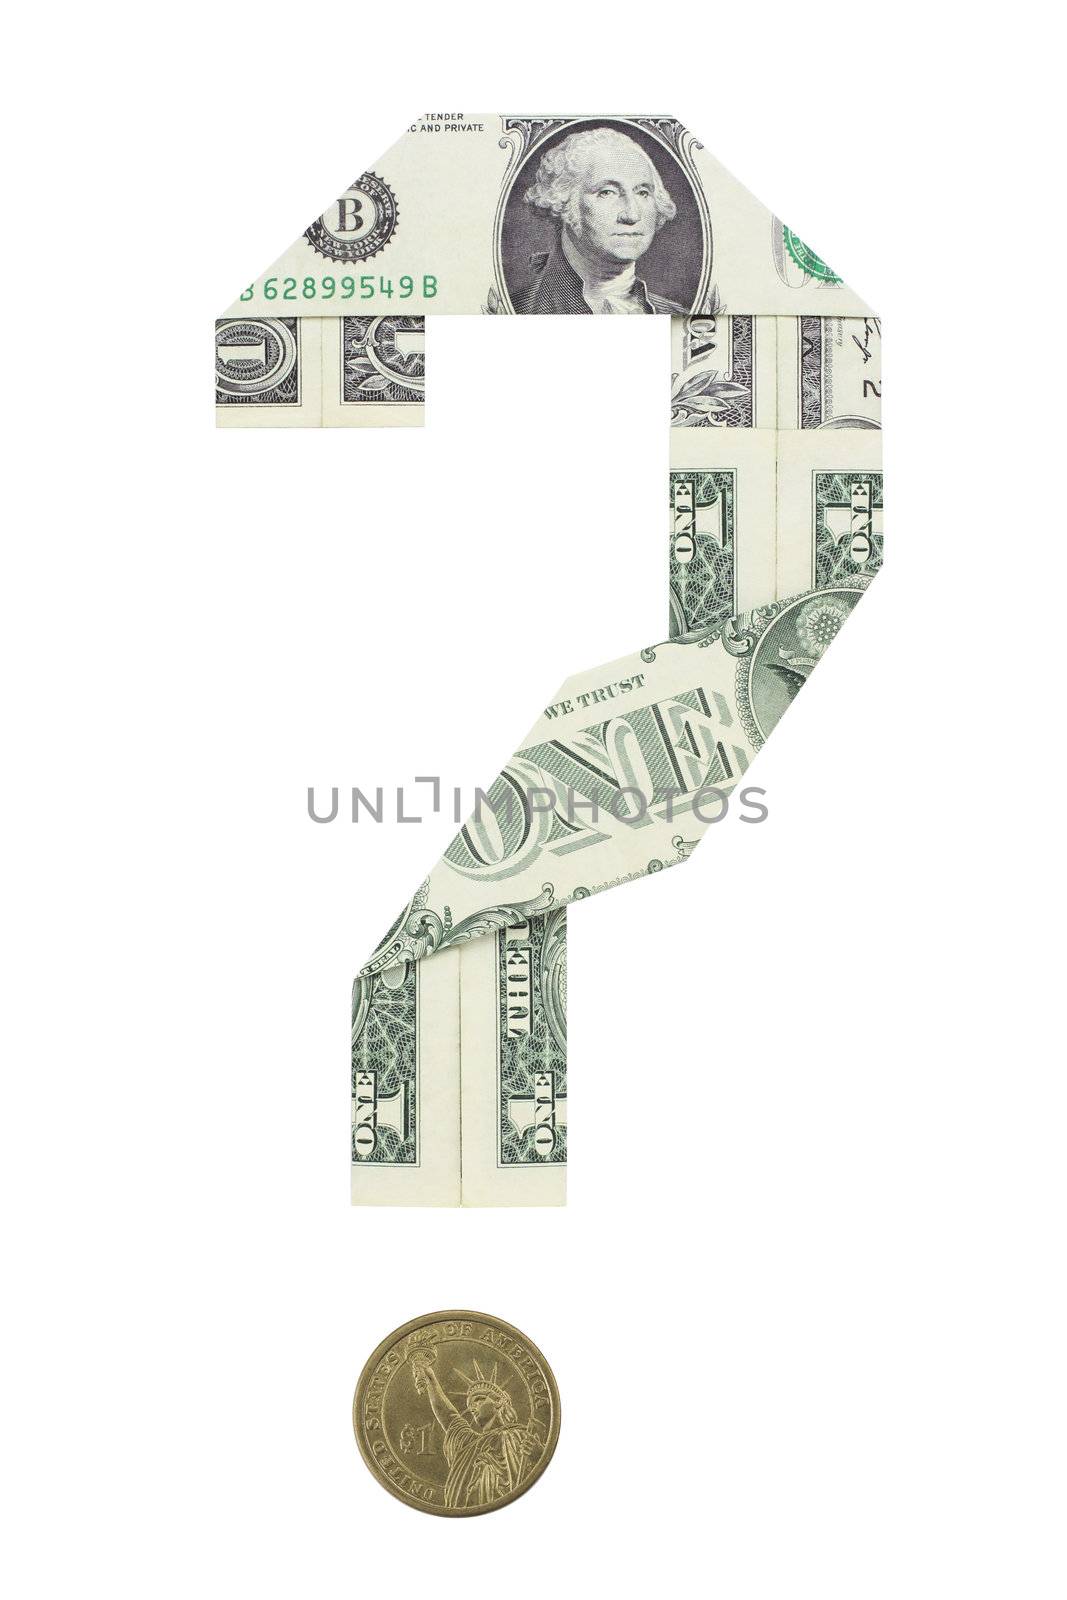 Dollar bills folded in the shape of a question mark. A dollar coin serves as the question mark's dot.